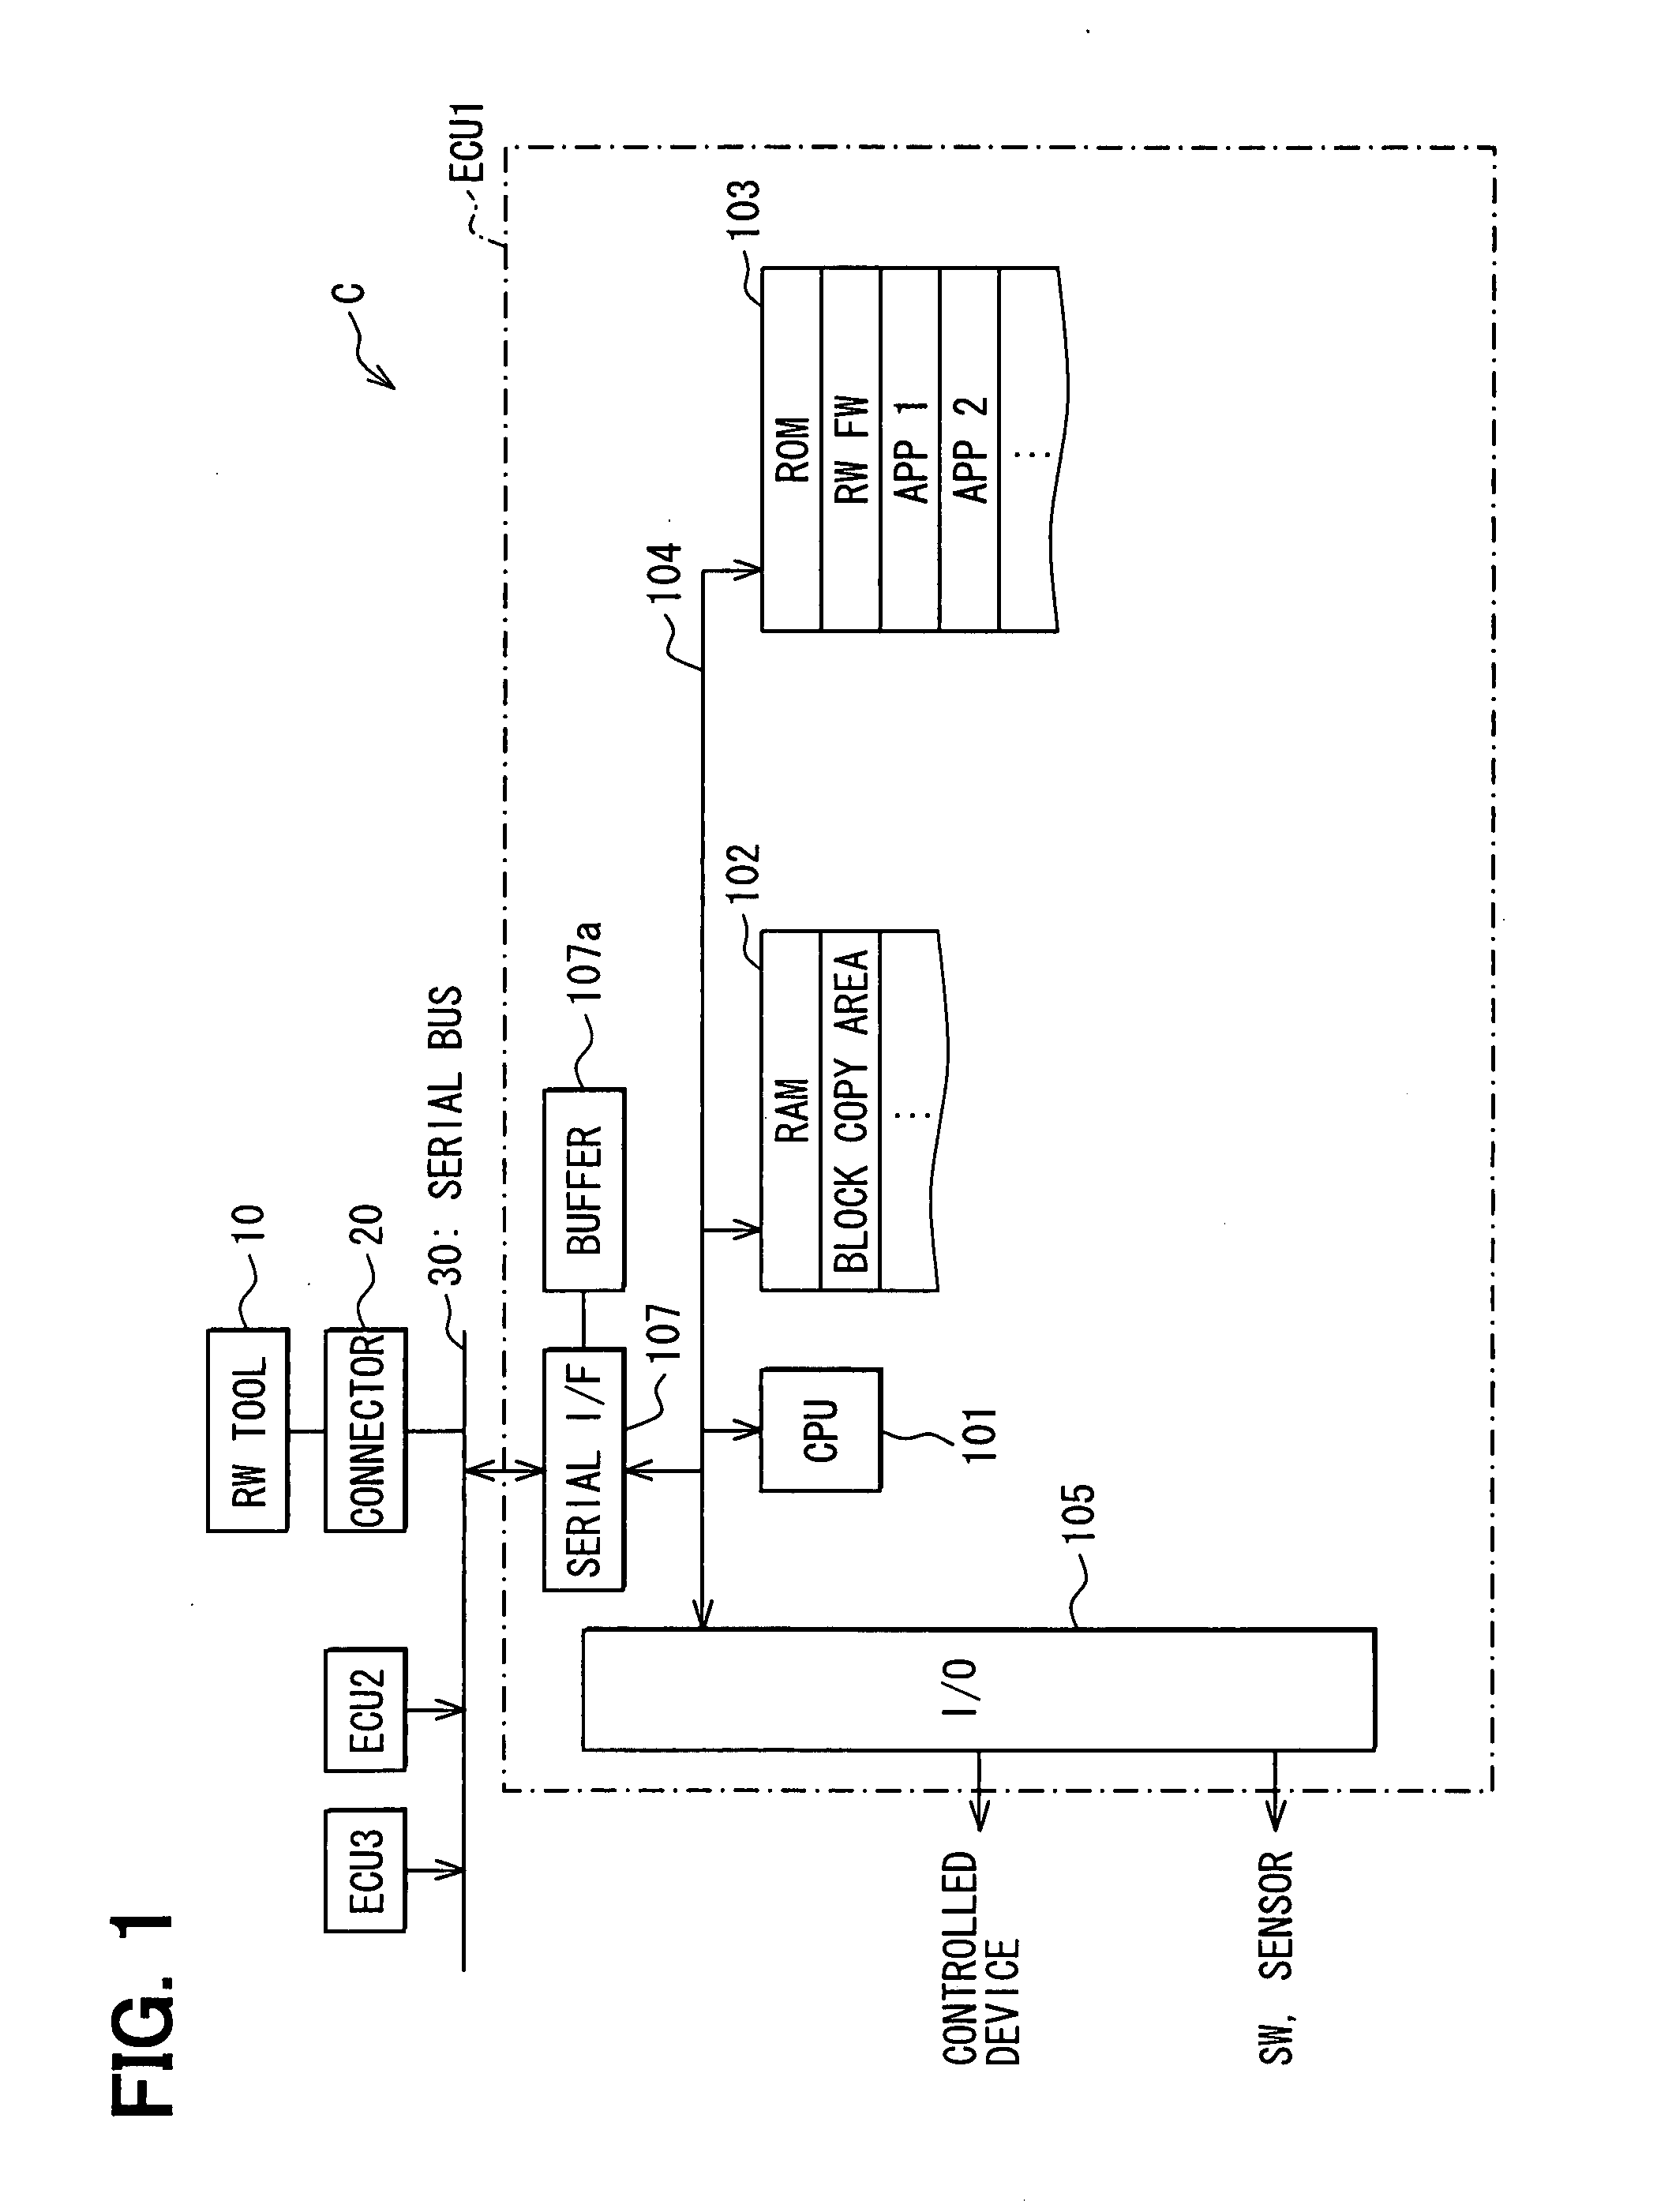 Vehicle information rewriting system